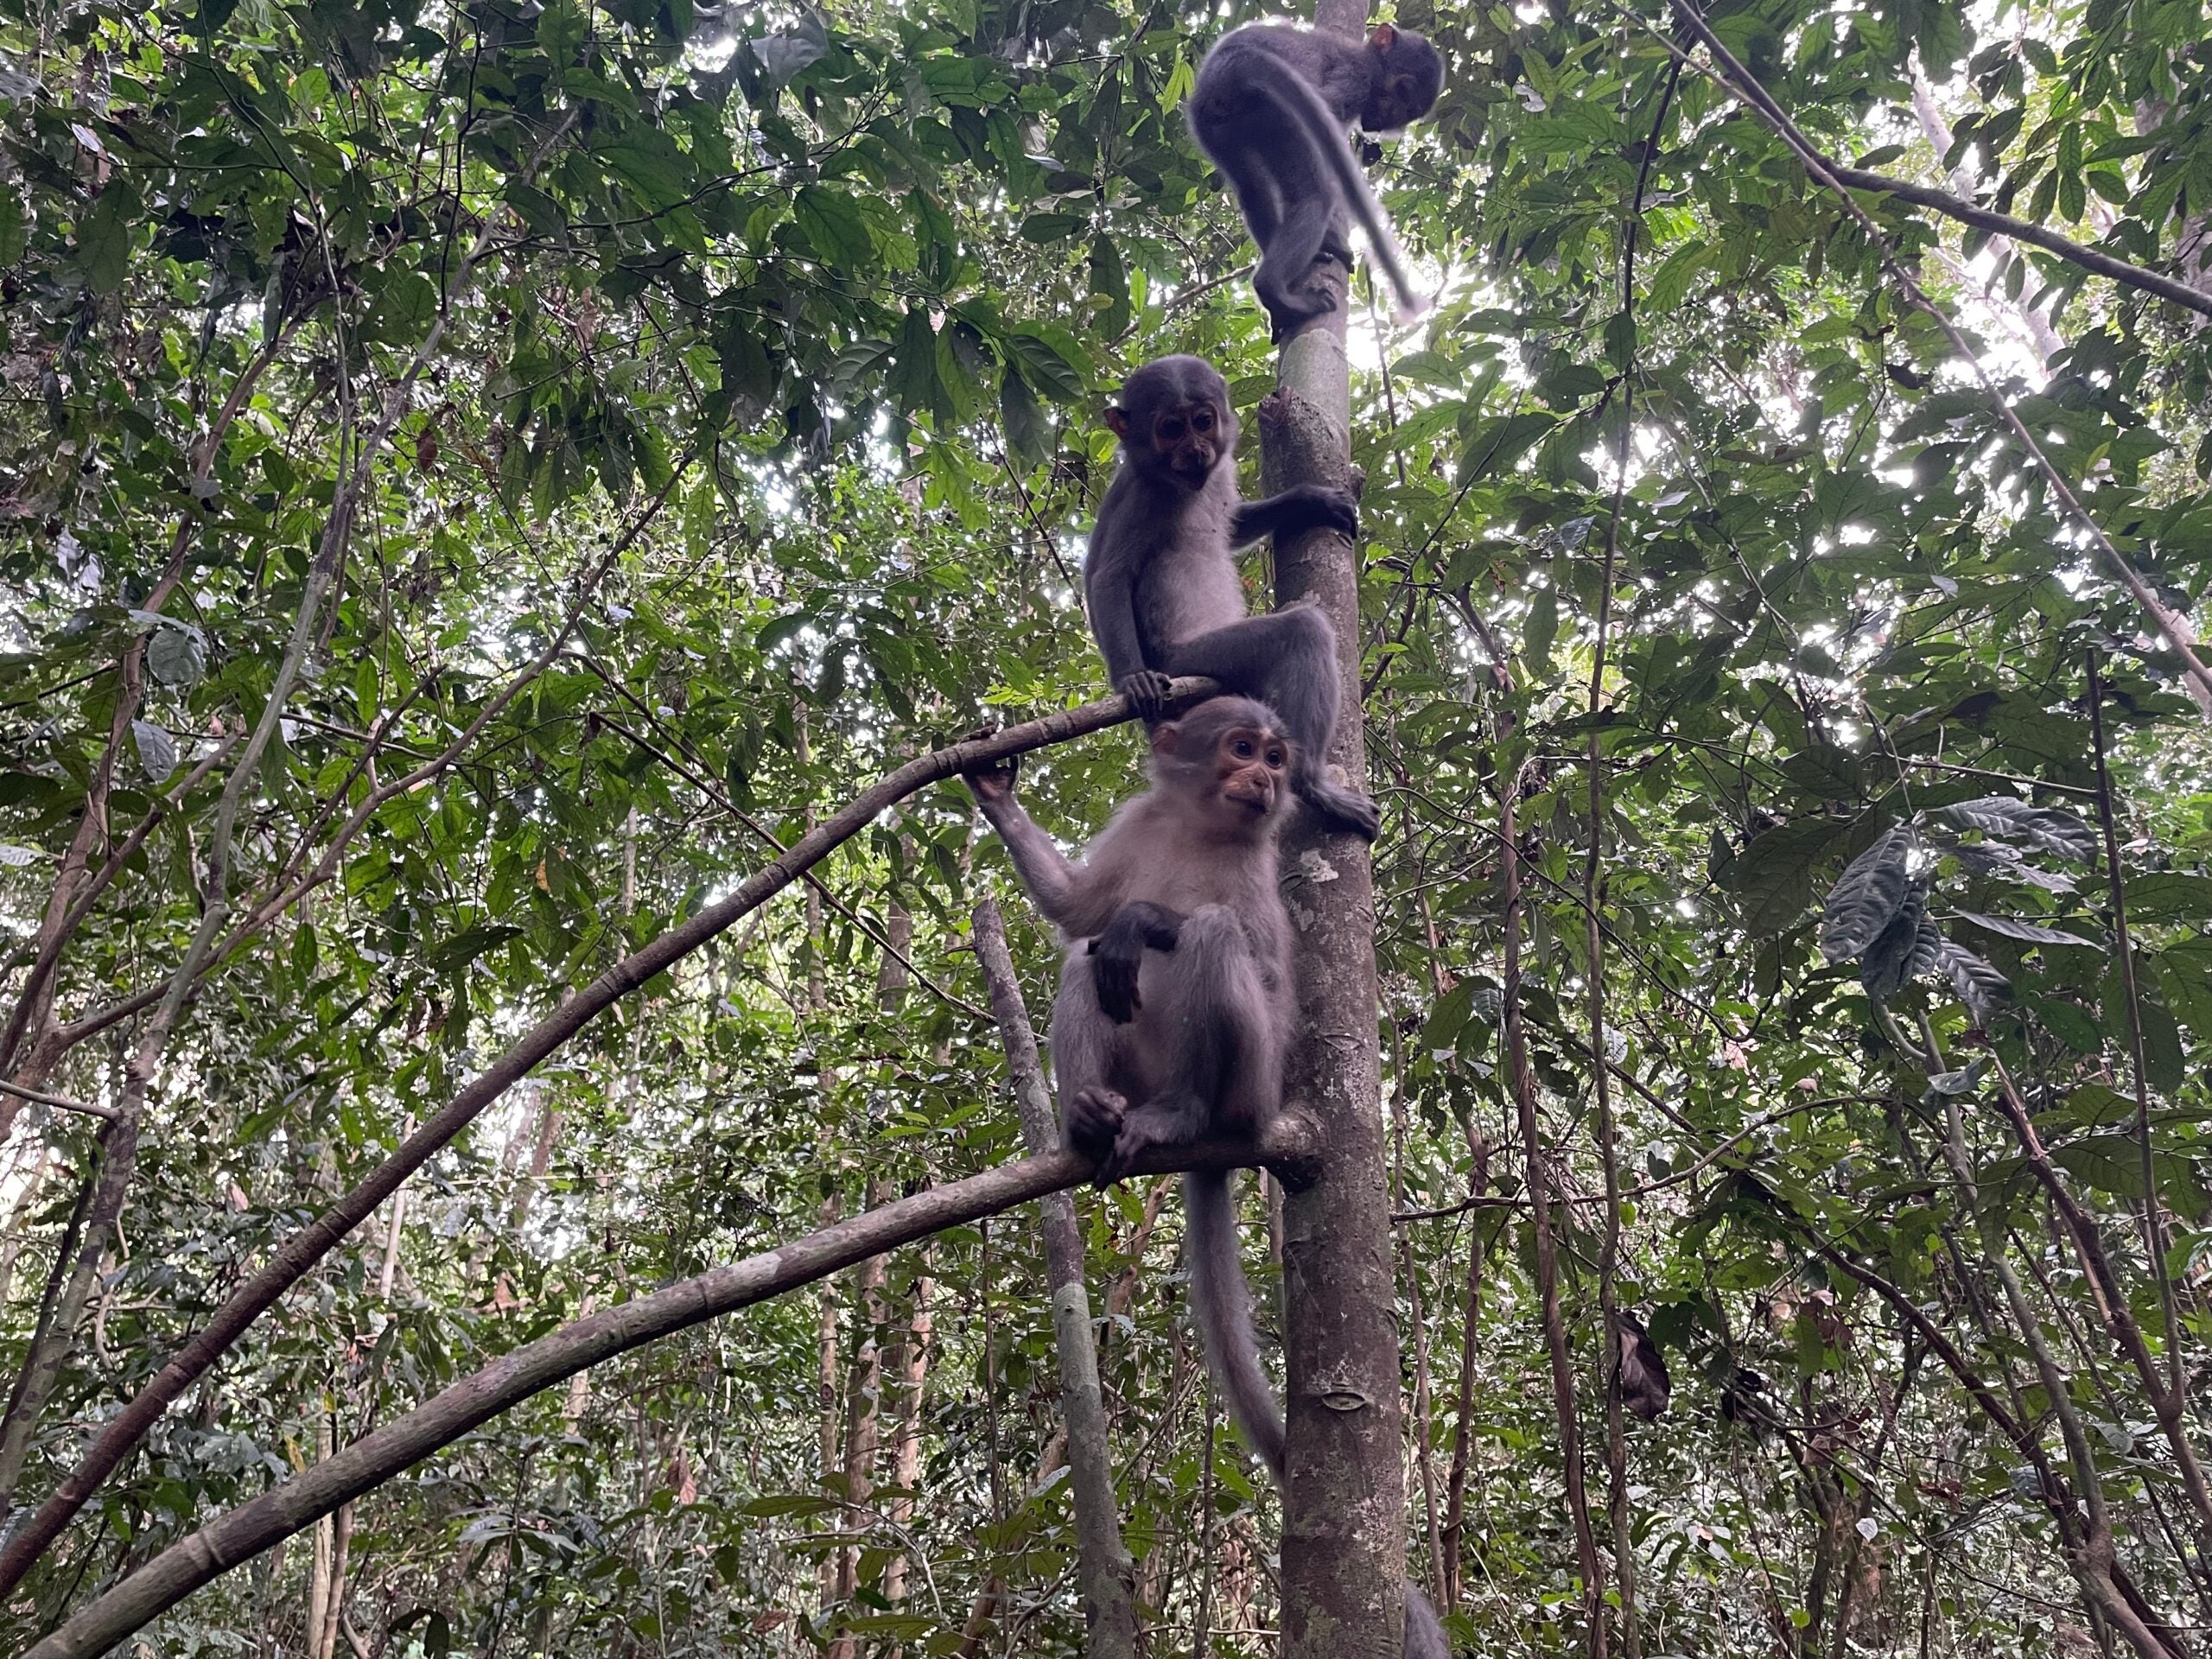 Three mangabeys in a tree. The researchers used sports-analysis software to compare the climbing movements of chimpanzees and mangabeys (pictured). They found that chimps support their greater weight when climbing down by fully extending their arms above their heads thanks to shallow, rounded shoulder joints and shortened elbow bones that are similar to those in humans. Mangabeys, which are built more like cats or dogs, have less flexibility and position their shoulders and elbows roughly the same when climbing up or down. CREDIT: Luke Fannin, Dartmouth
